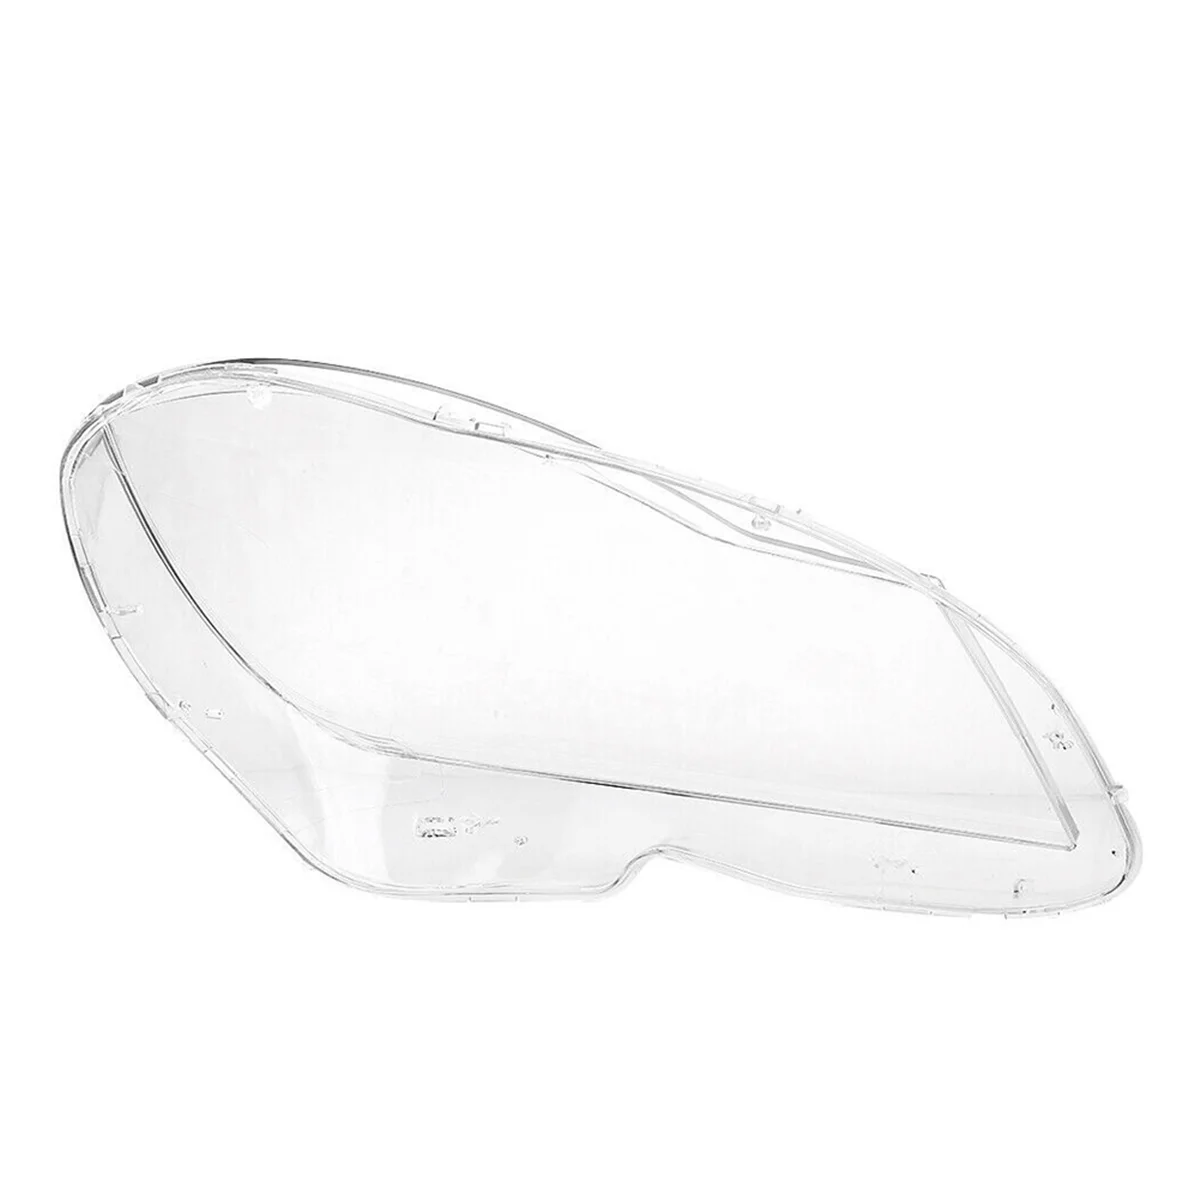 

Right Car Headlight Lens Cover Head Light Lamp Shade Shell Lens Lampshade for Mercedes Benz W204 C-Calss 2011-2013